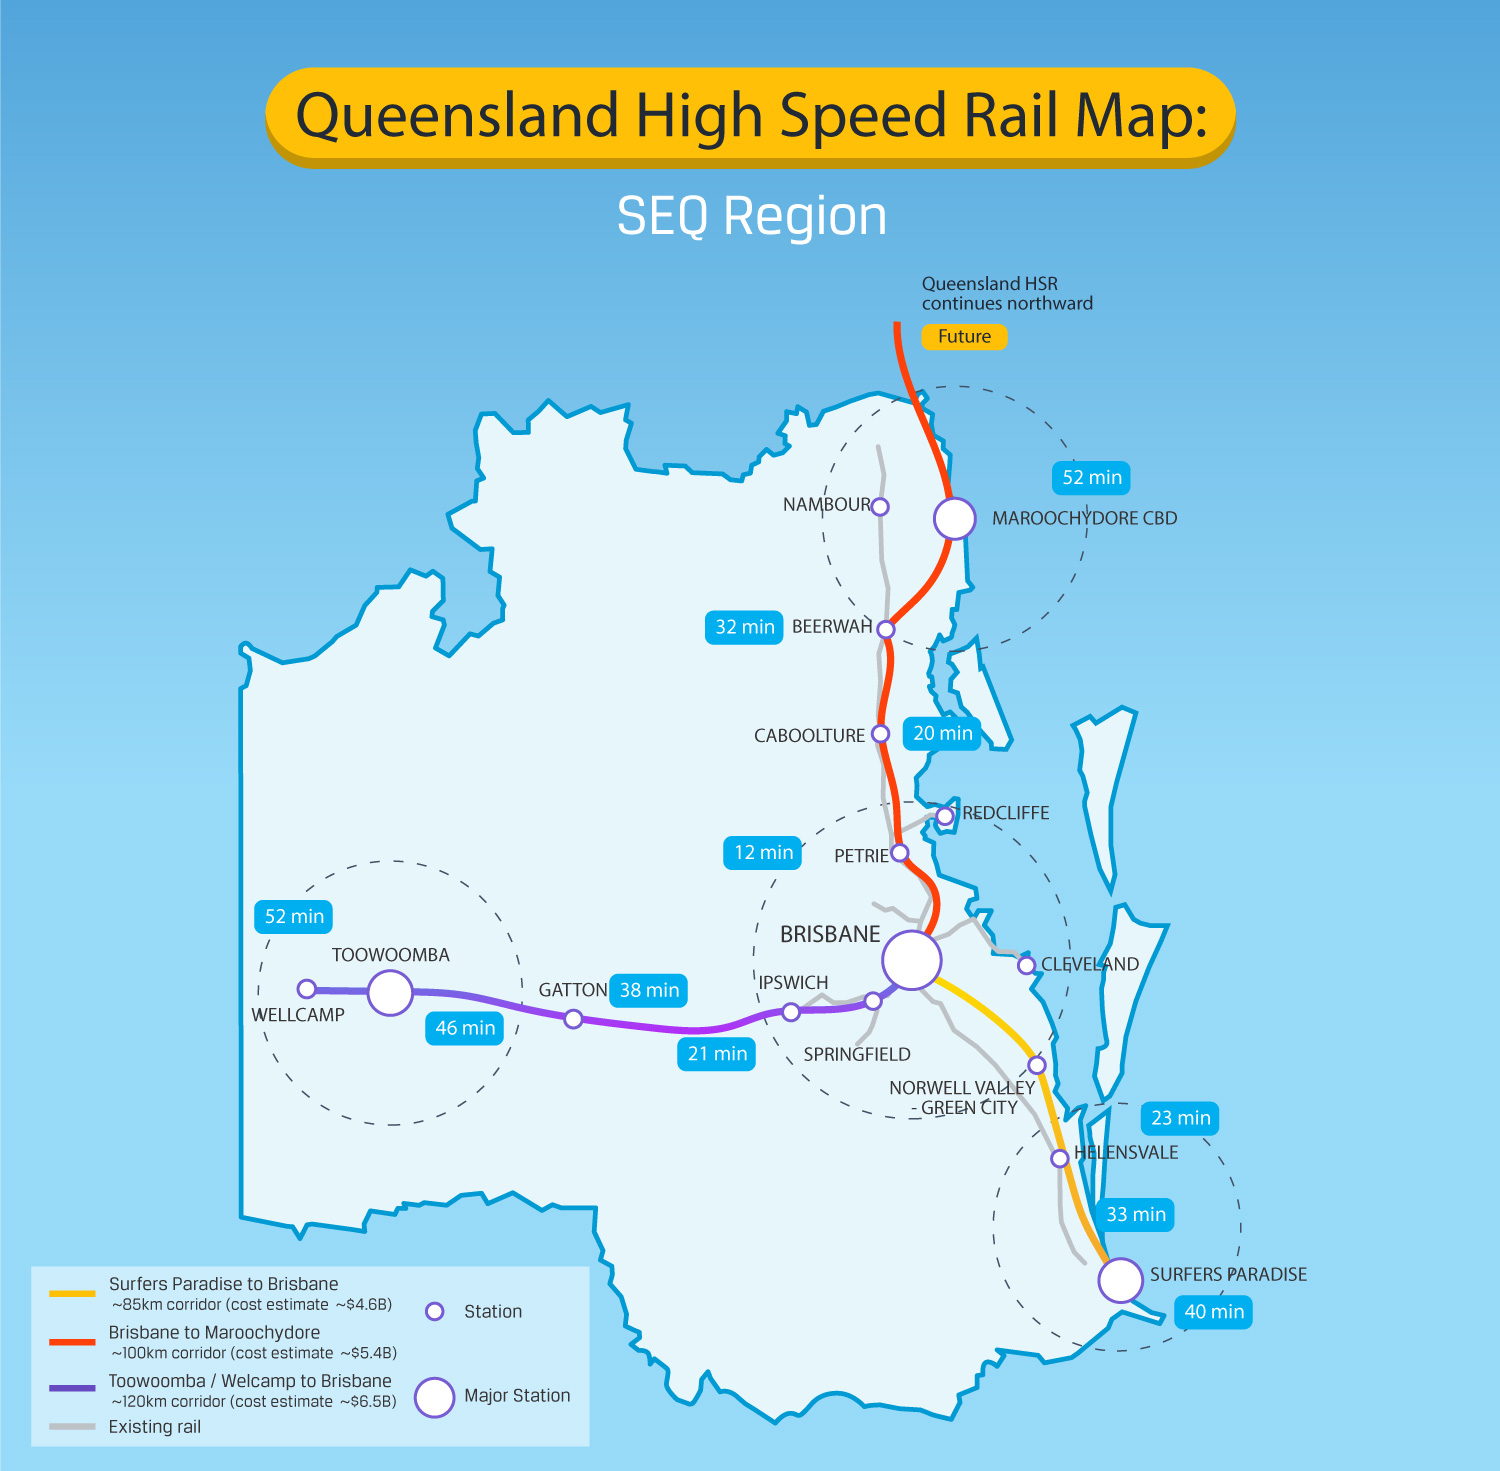 Possible Route for South East Queensland High Speed Rail